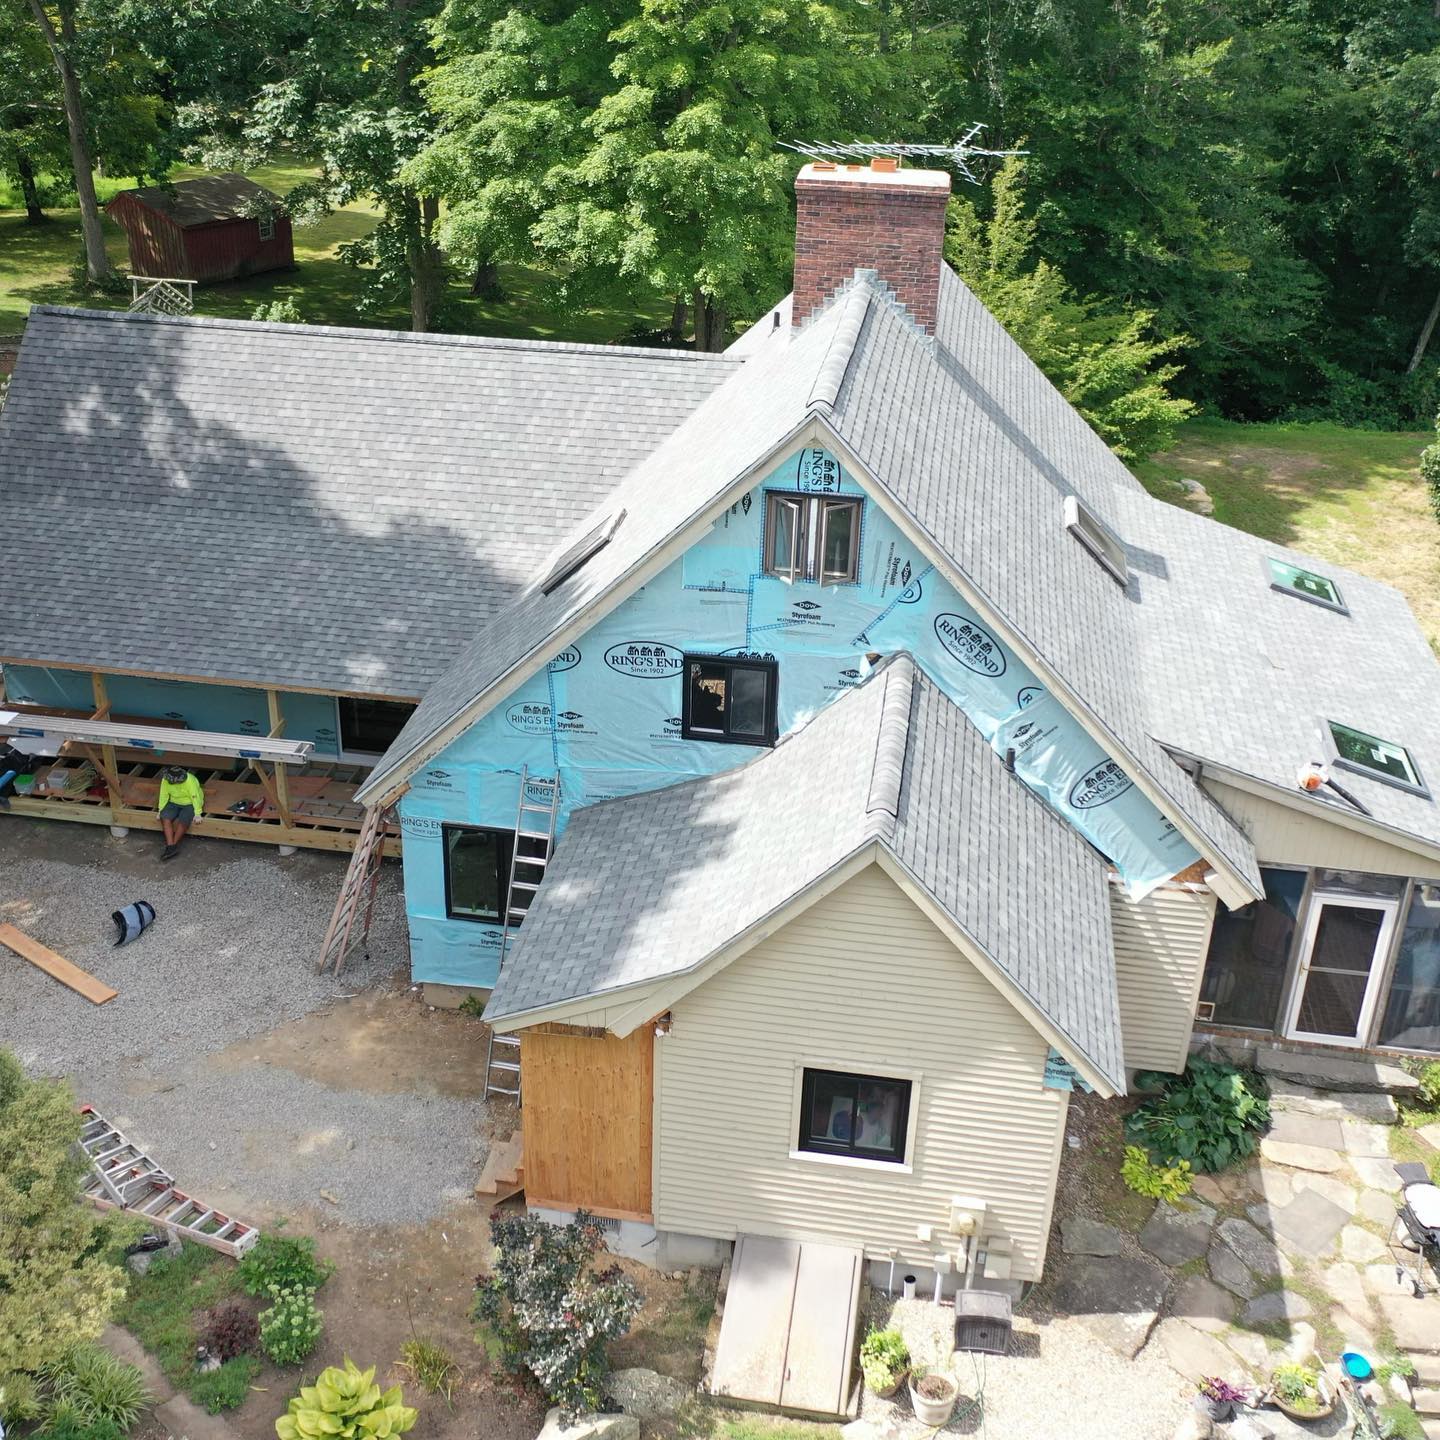 Lyme CT Roof Replacement 3 BP Builder Company in CT | Roofer, Roof Replacement, CT Roofing Company & General Contractor CT